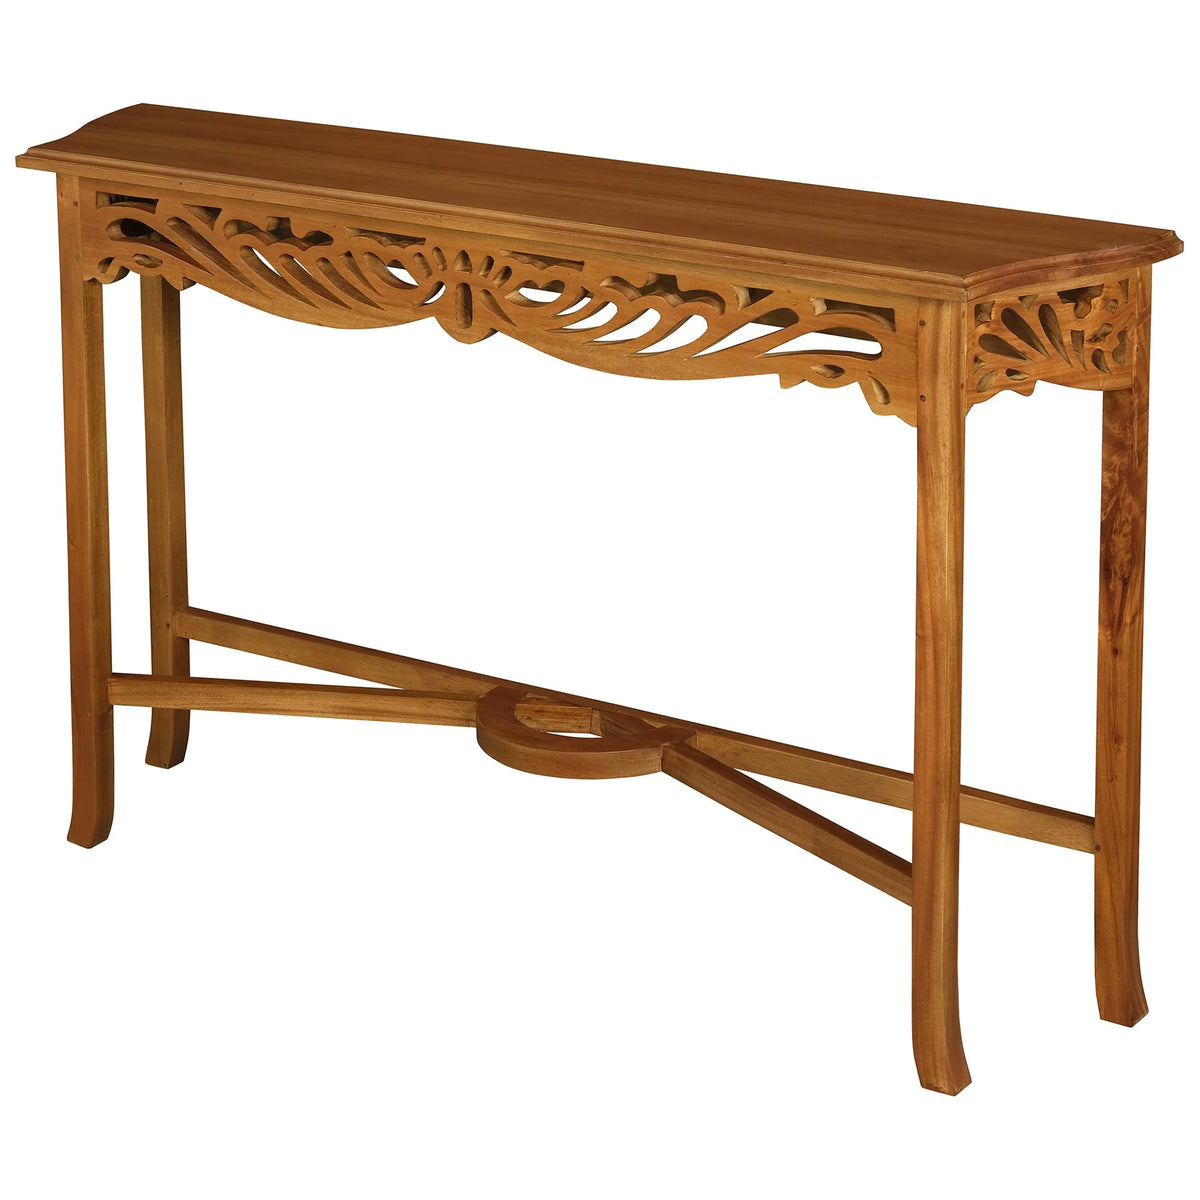 Jepara Handcarved Timber Console in Light Pecan - 120cm - Notbrand